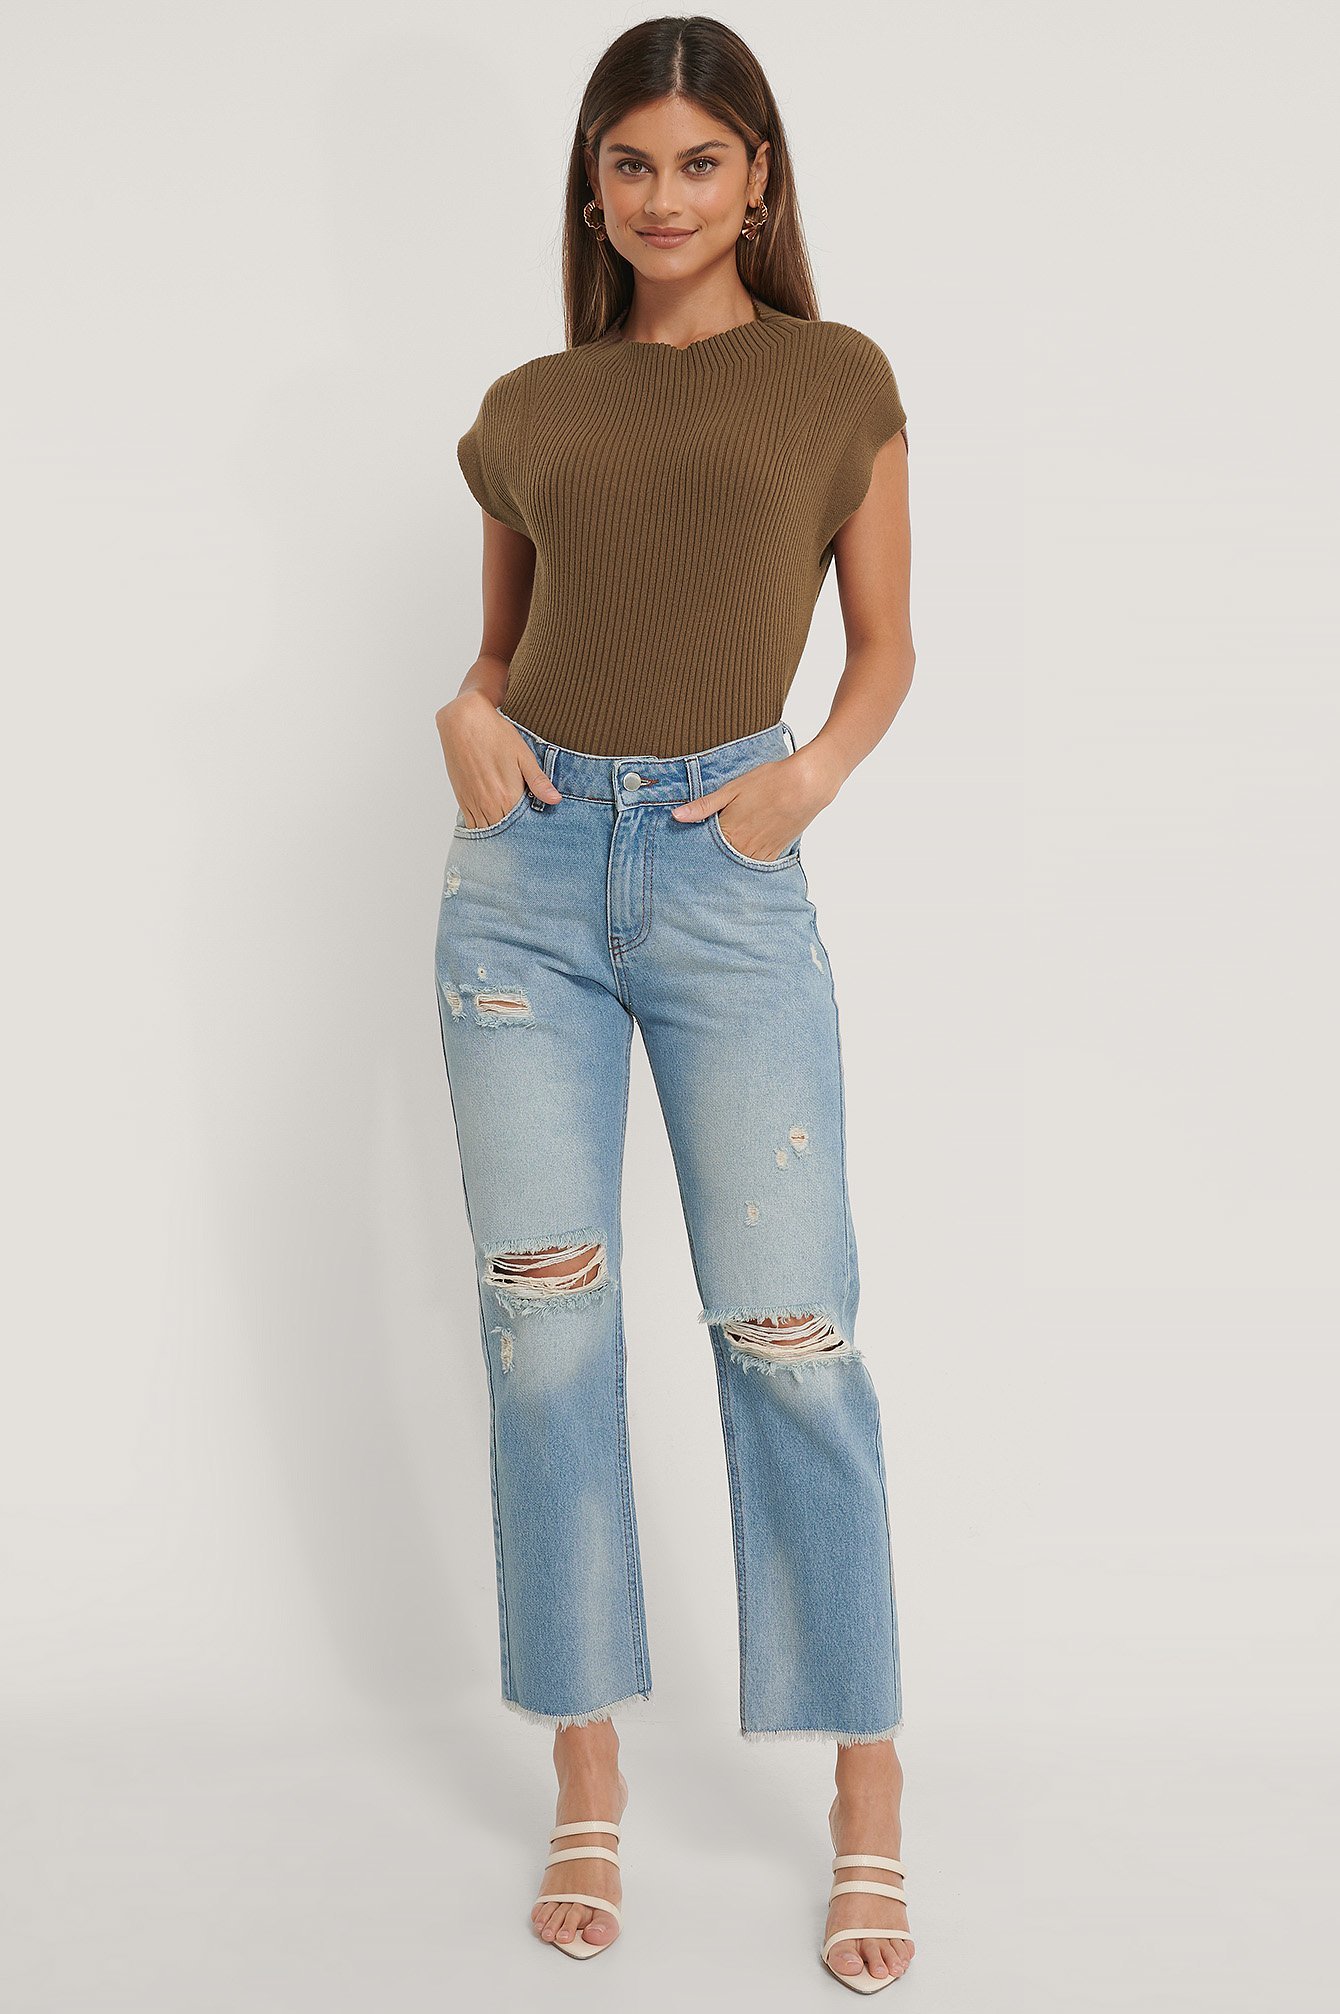 Straight Destroyed Fringed Hem Jeans Outfit